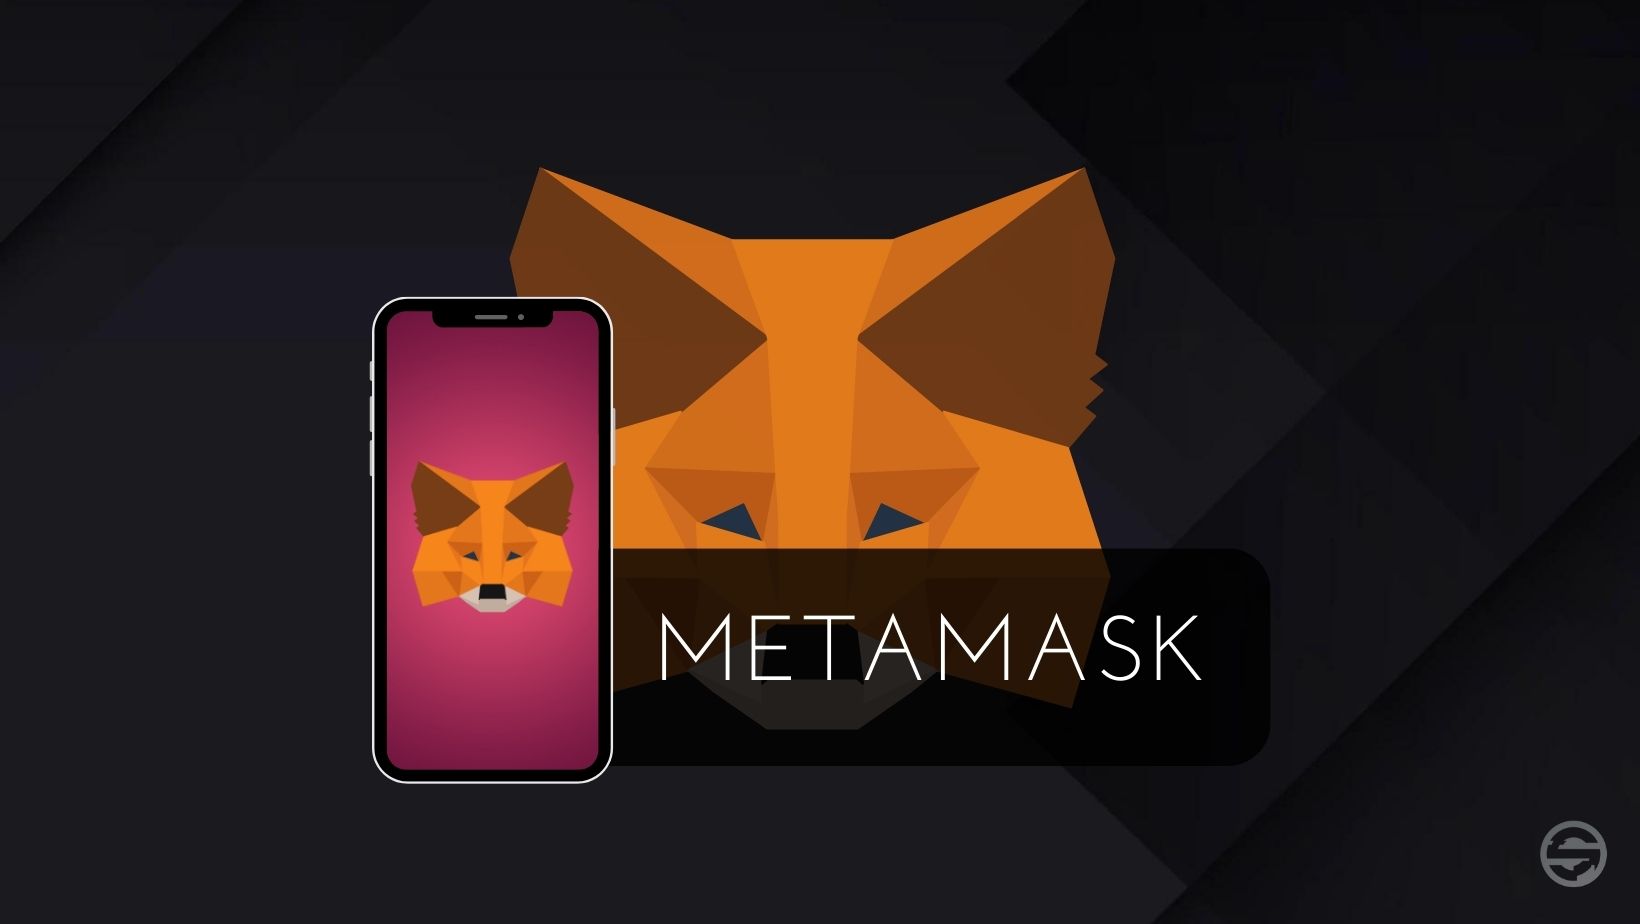 How to create a Metamask account?